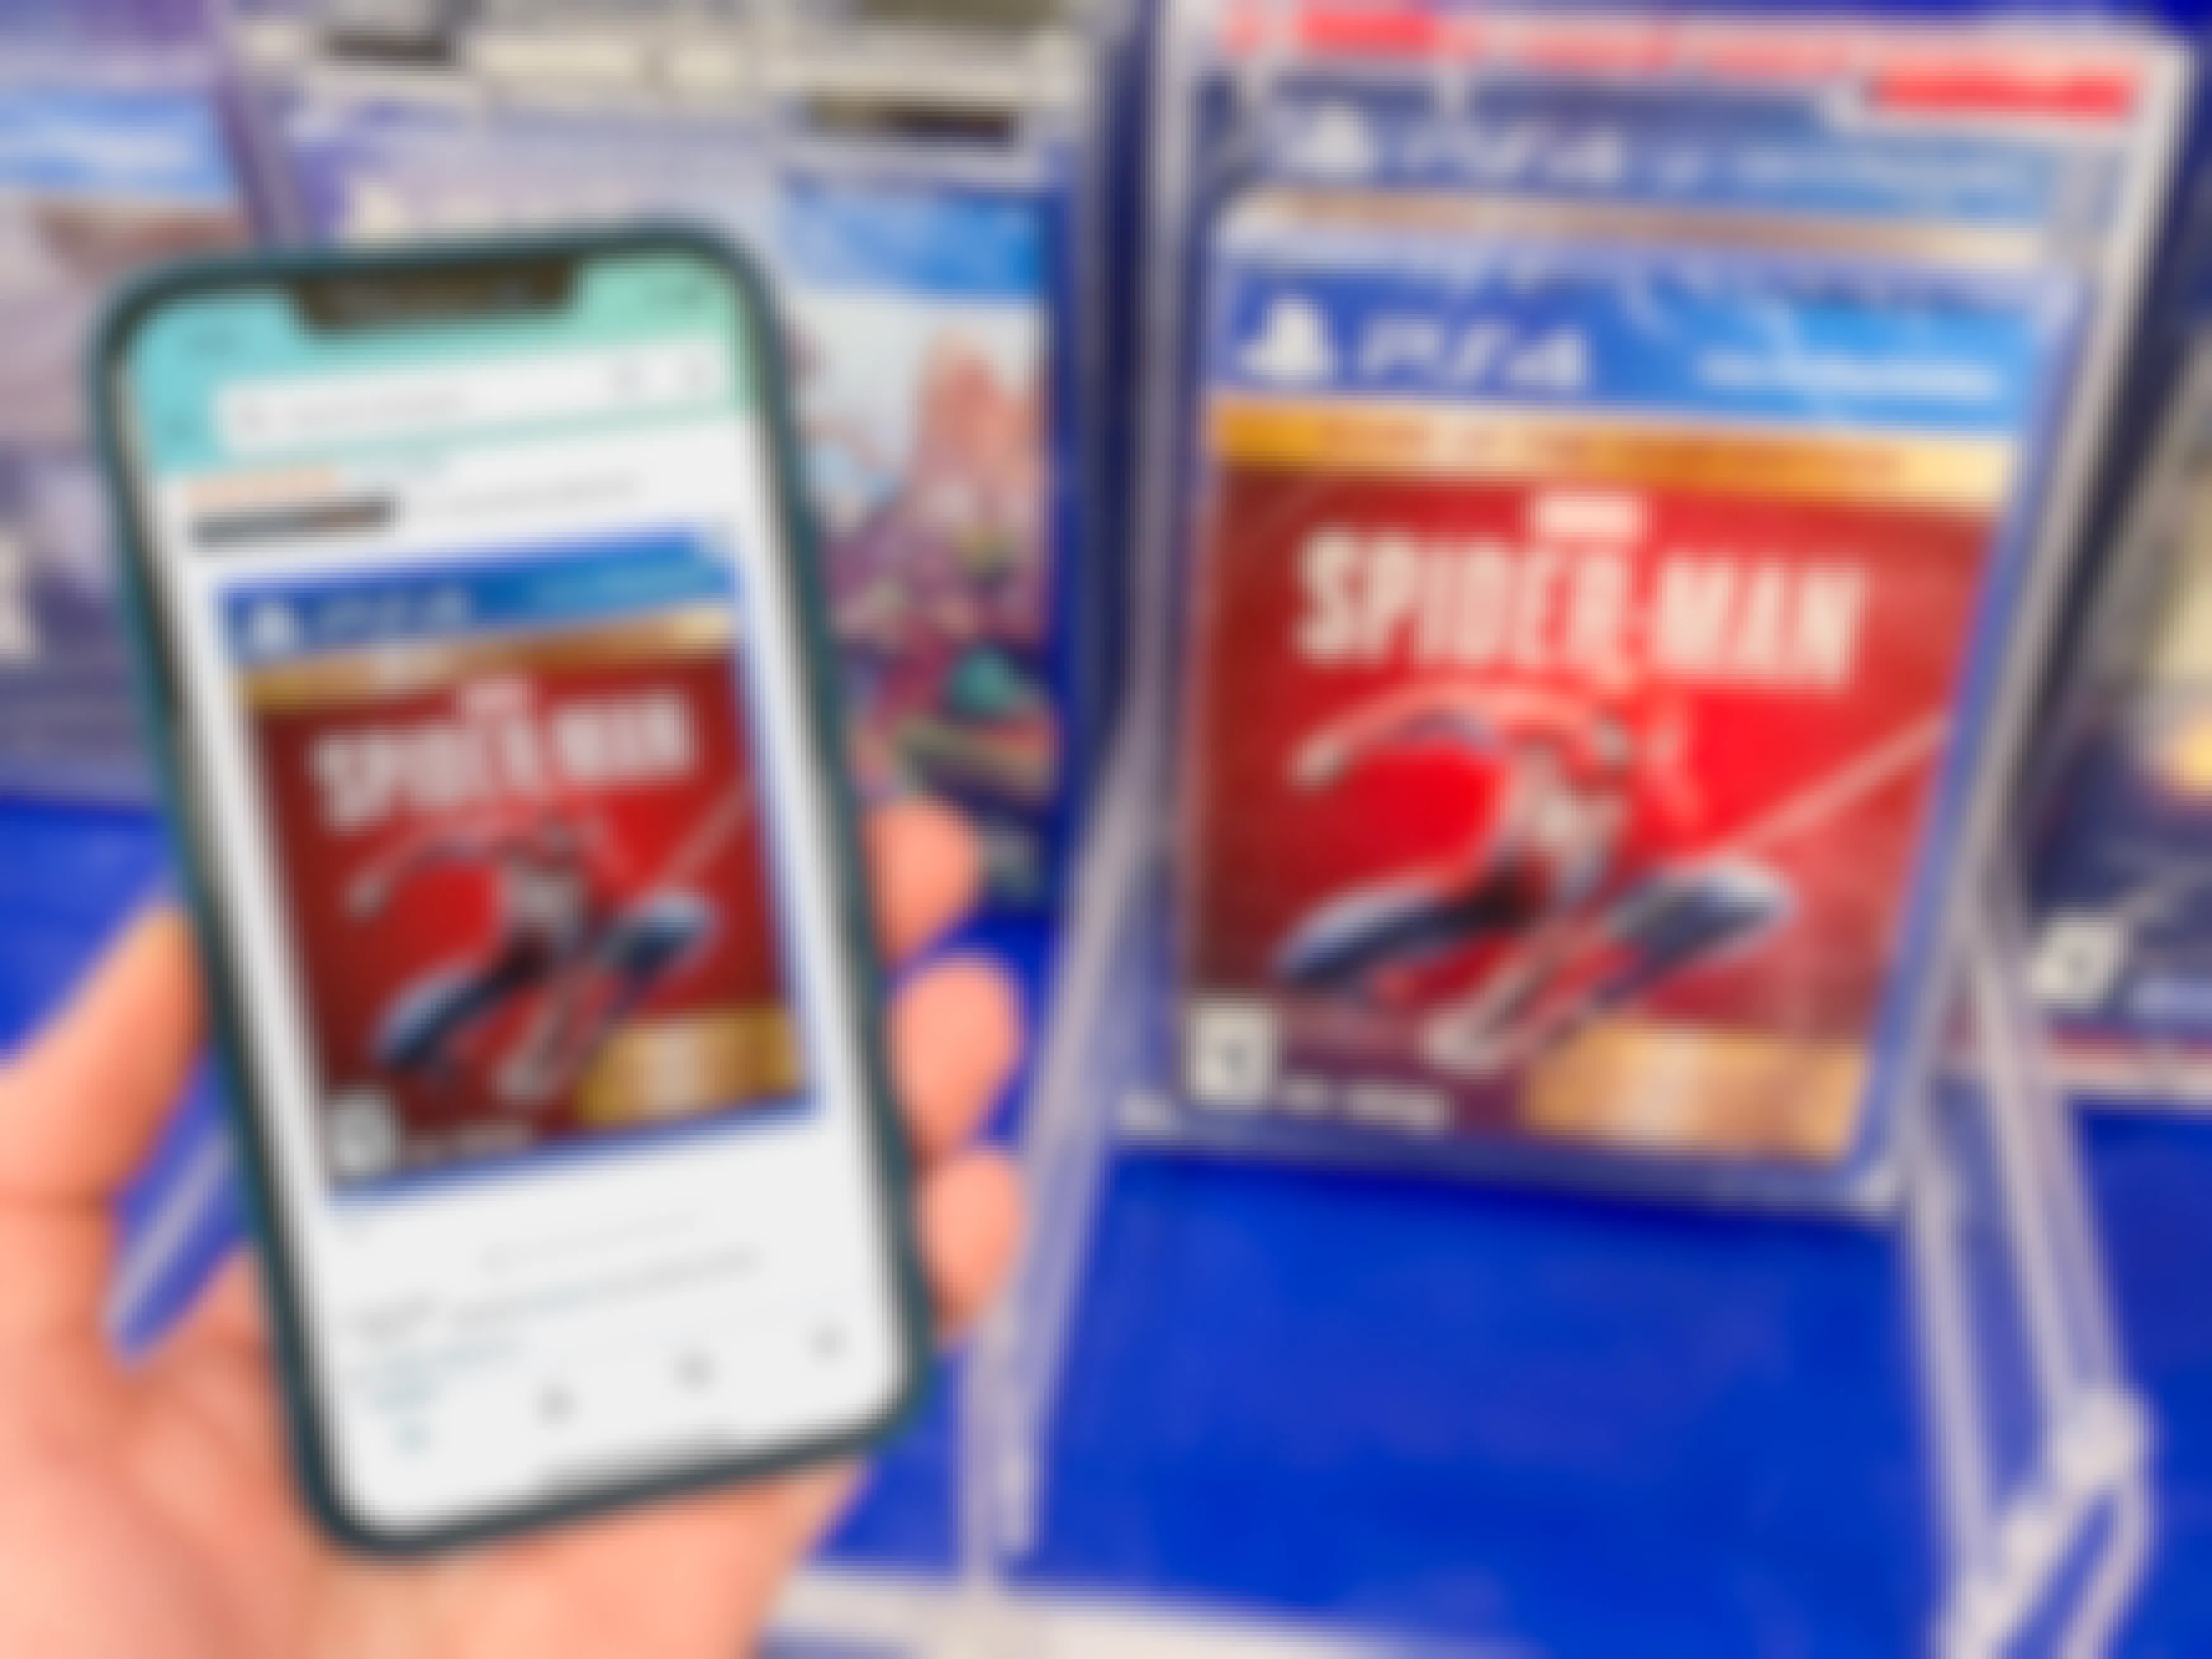 A Sony Spiderman game on a shelf at Target. A cell phone displaying the price on the game from Amazon held next to it.